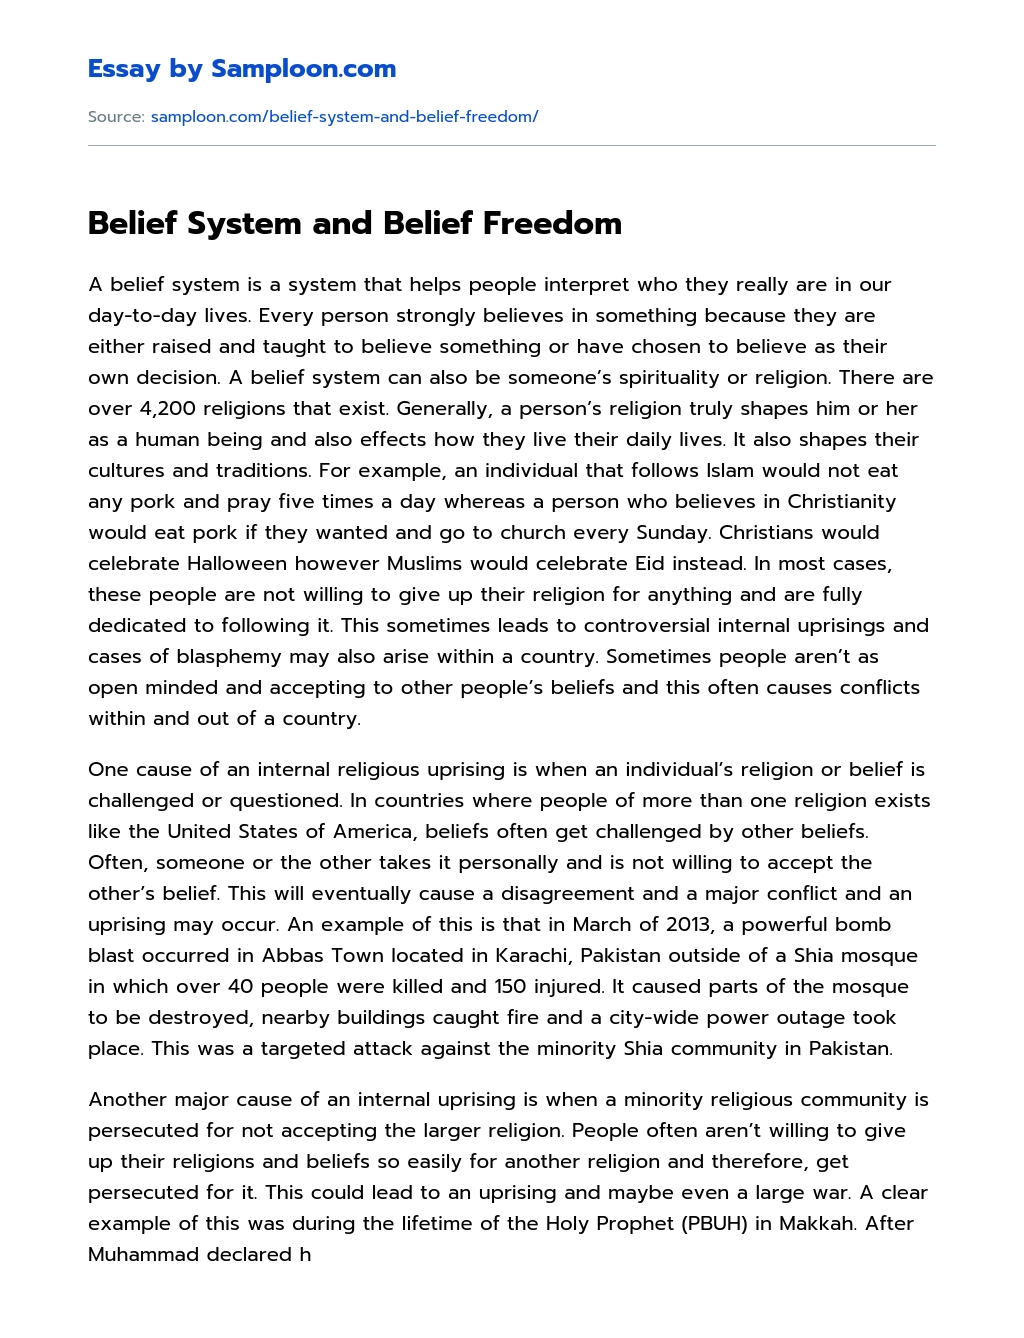 Belief System and Belief Freedom essay